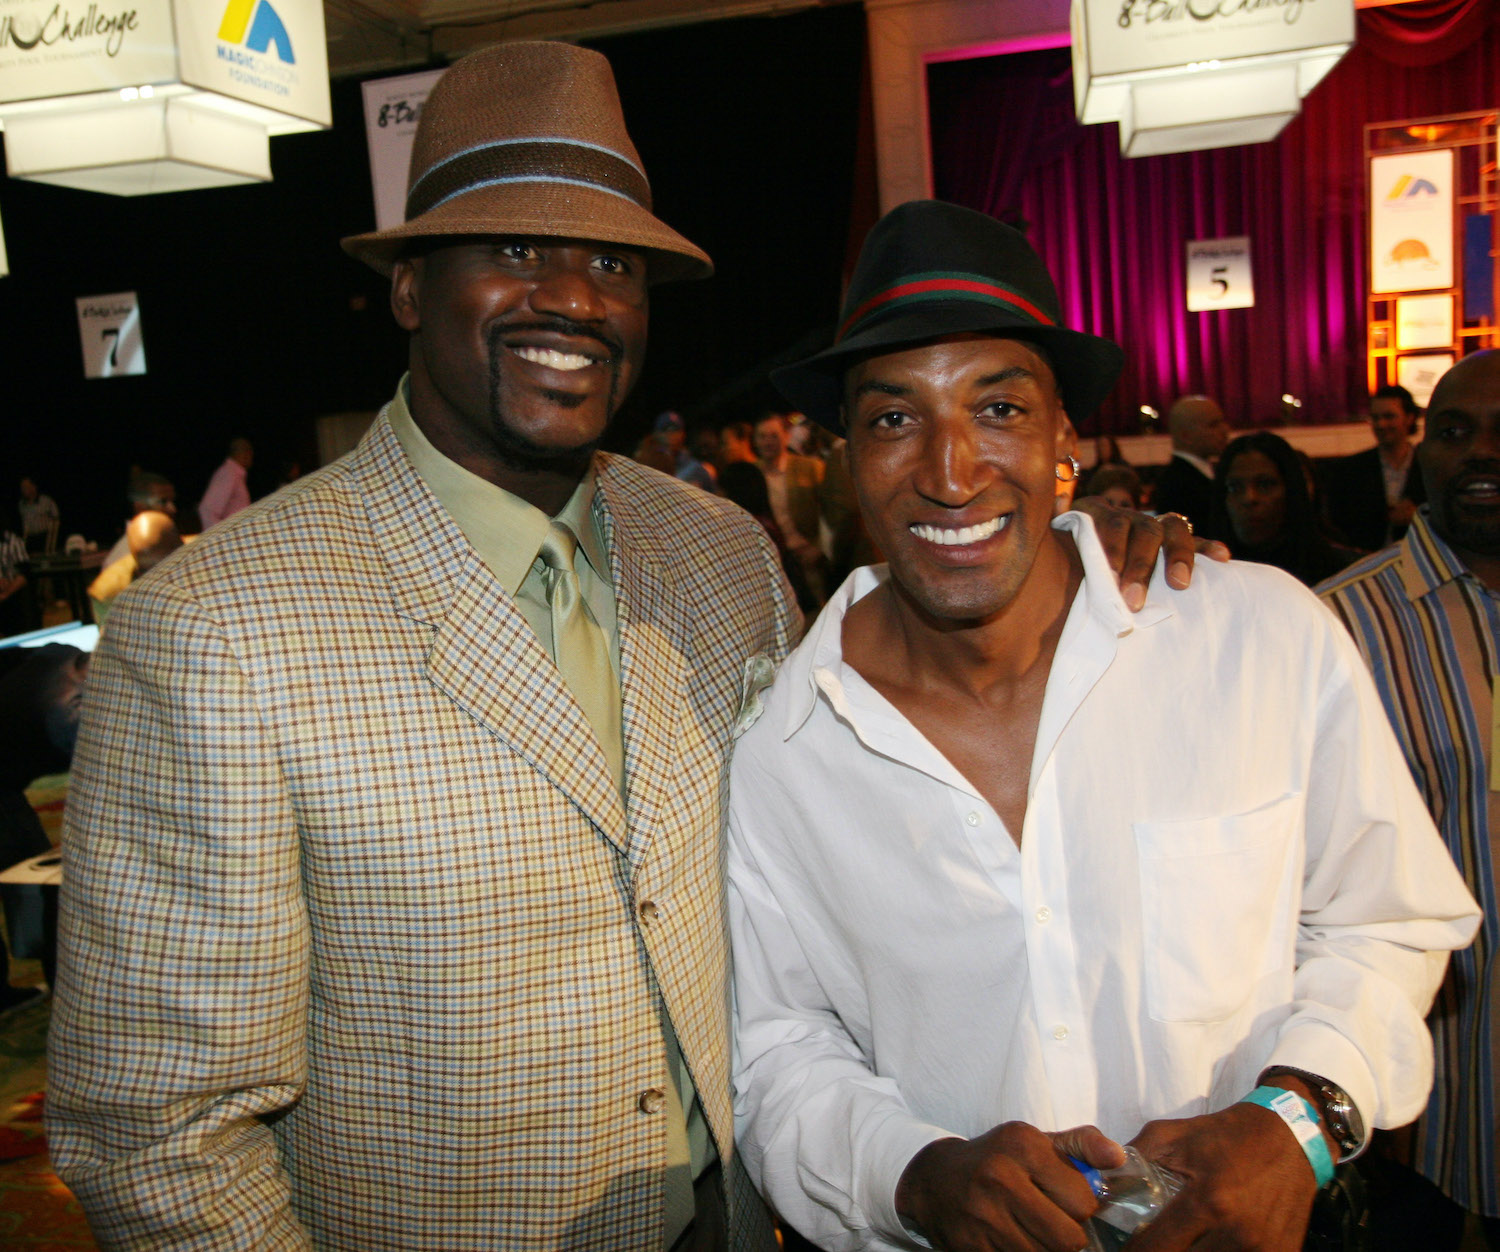 Scottie Pippen (R) and Shaquille O'Neal (R) together at a celebrity pool tournament.